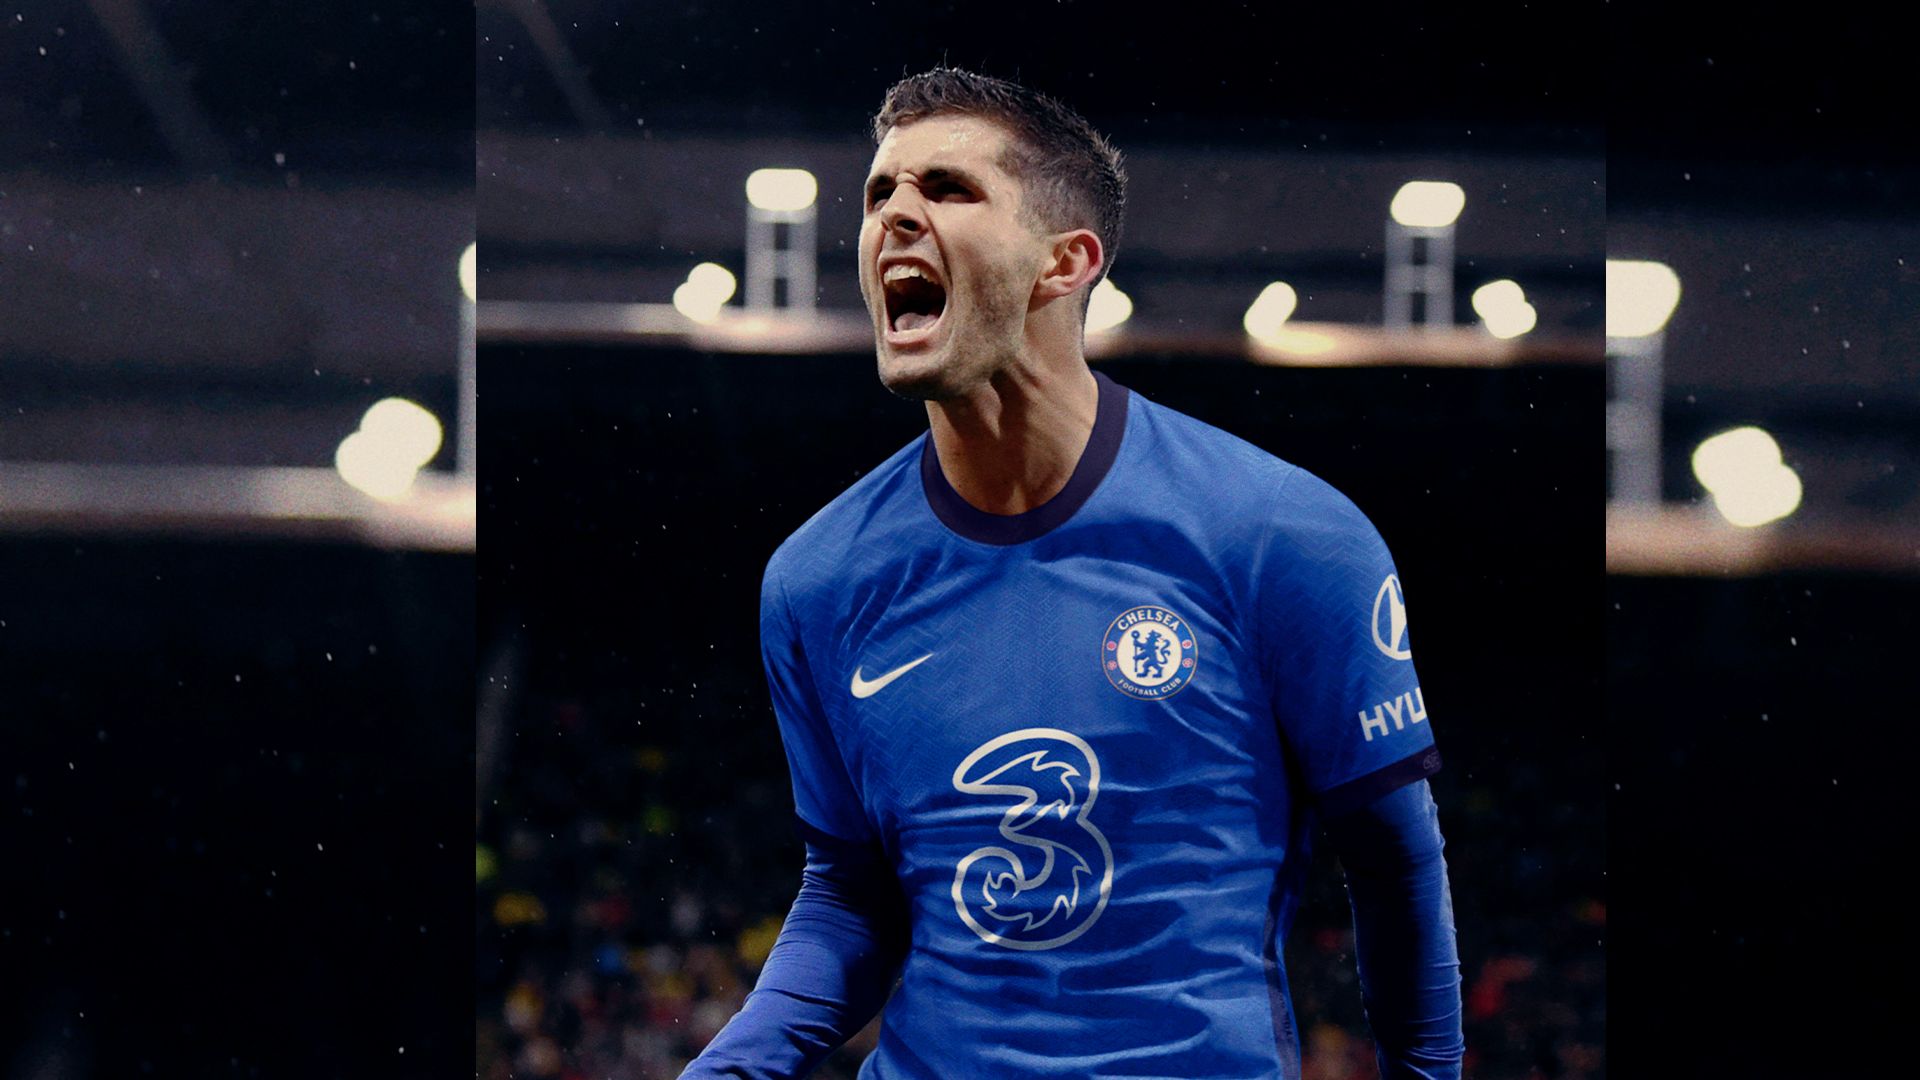 Images): Chelsea Confirm New 20 21 Home Kit For Next Season Wear It Tonight Chelsea News